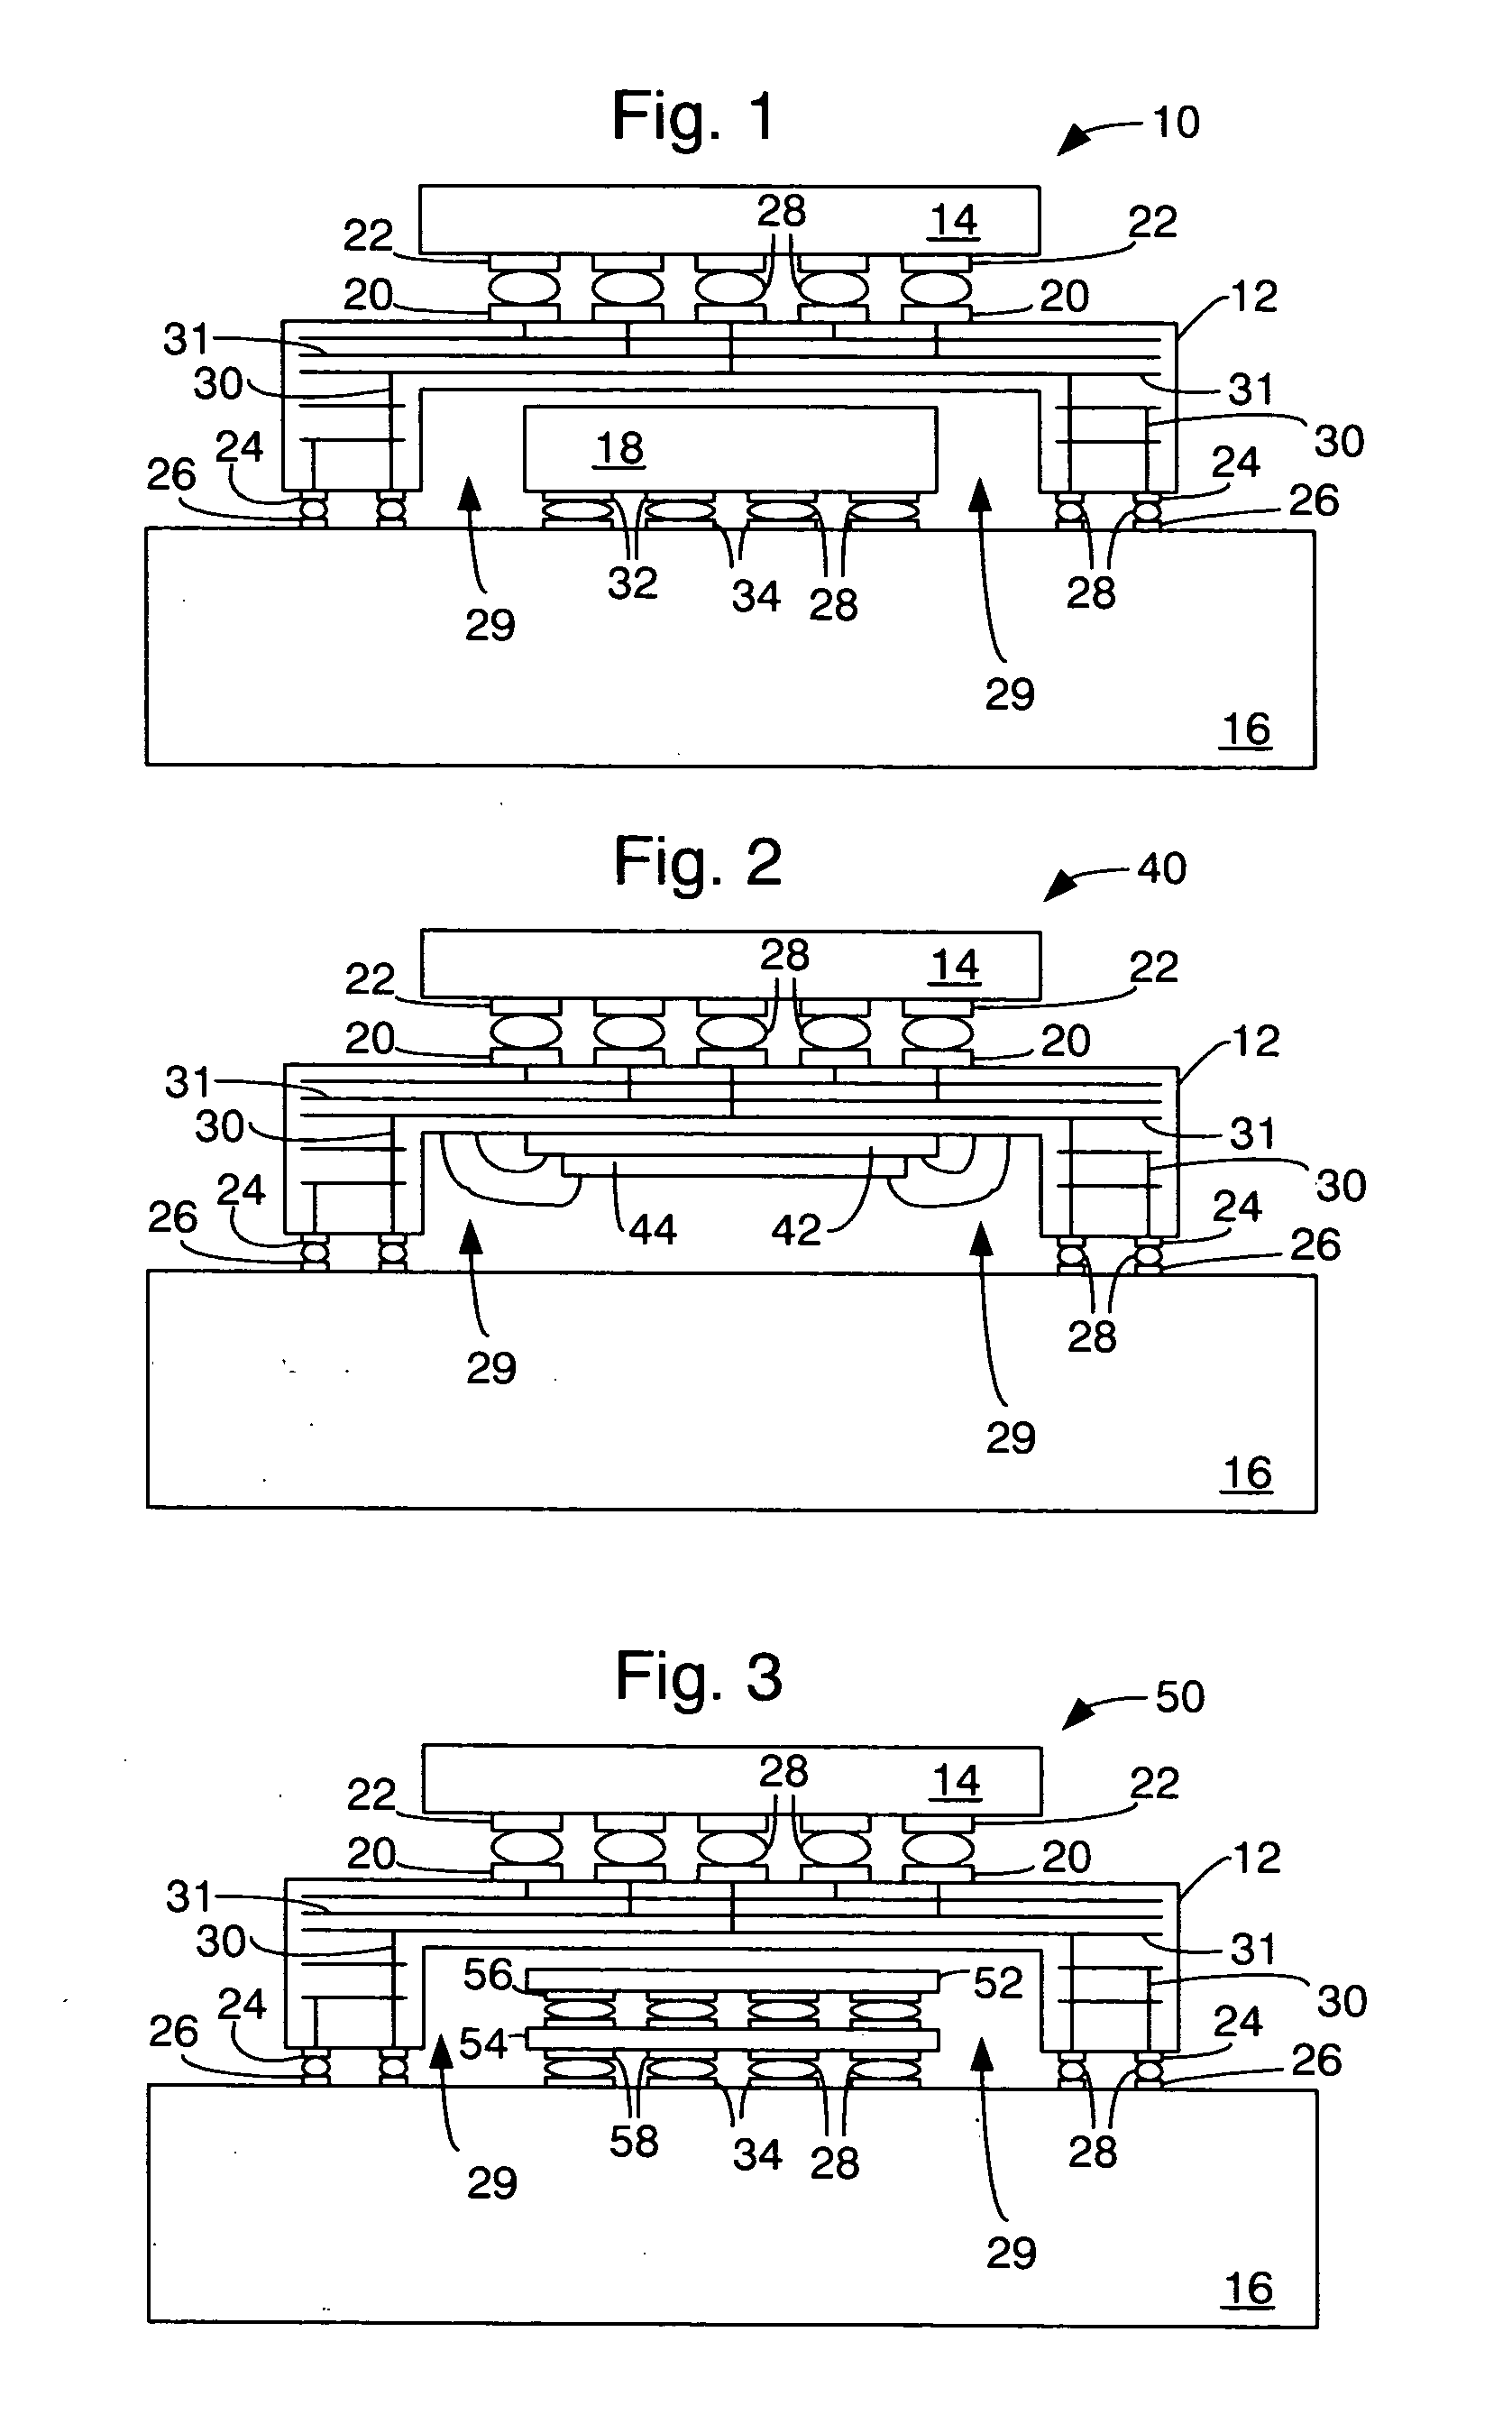 Stack package for high density integrated circuits